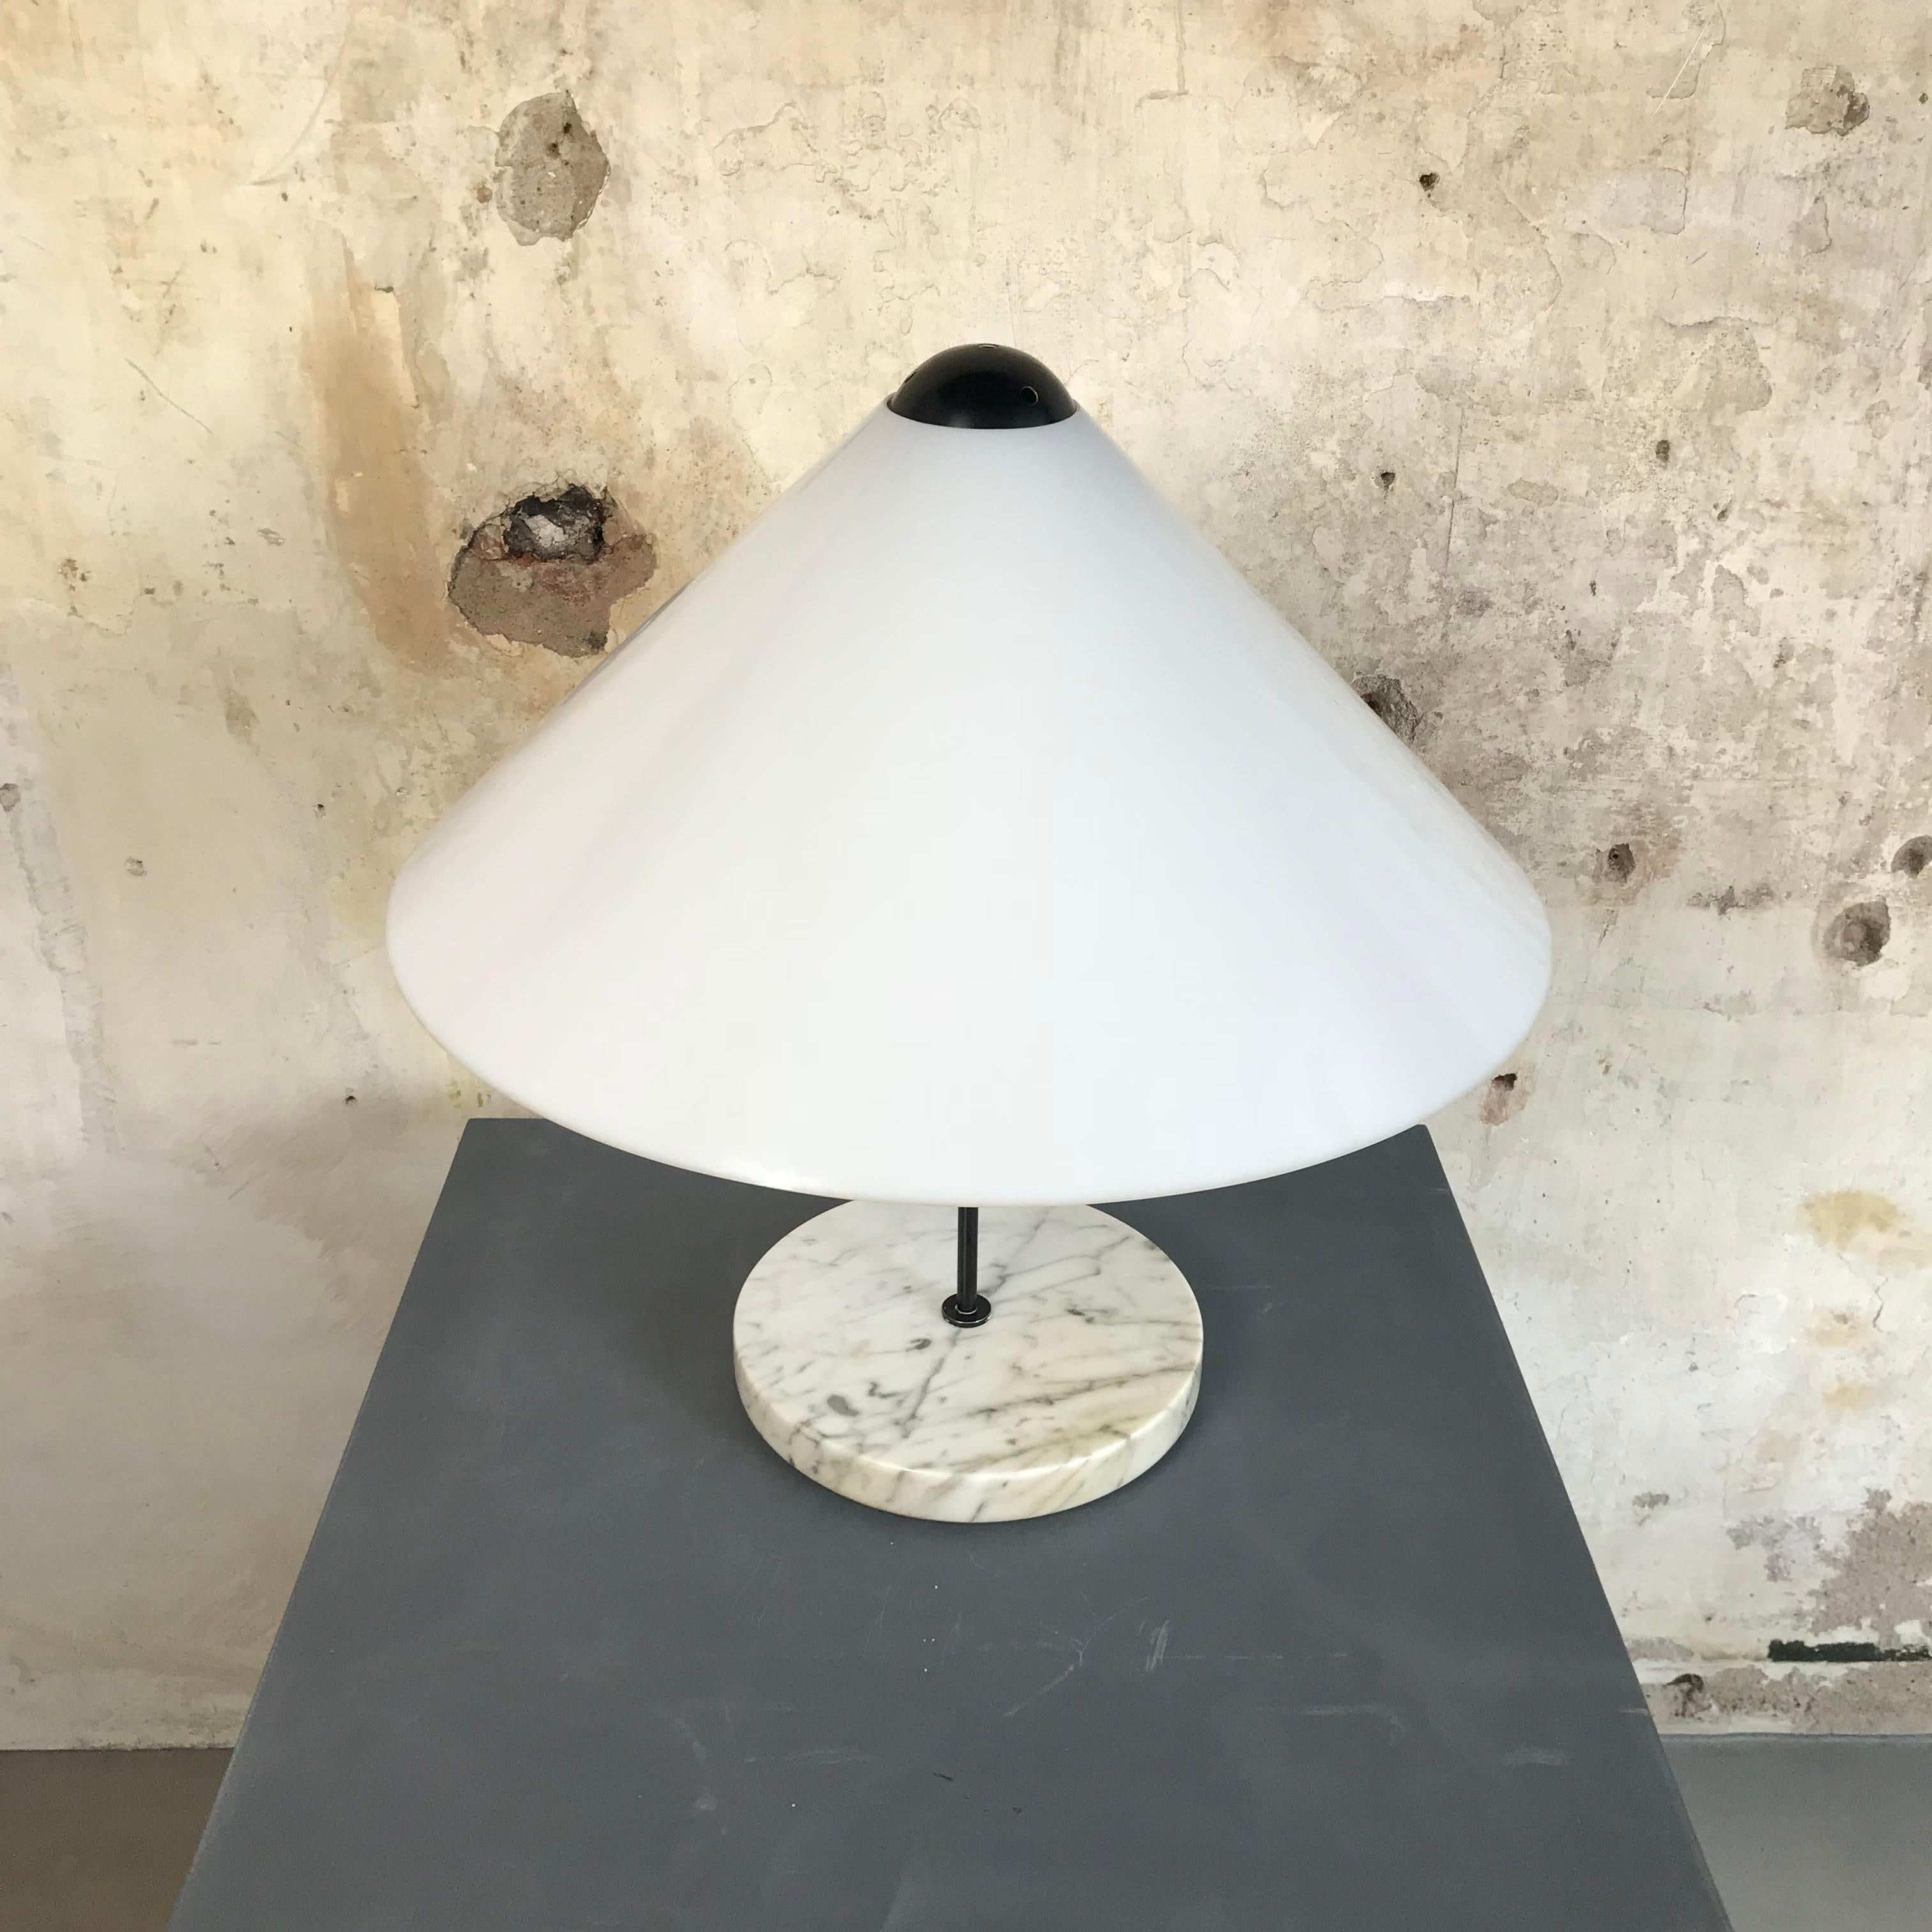 Mid-Century Modern Rare Vintage ‘Snow’ Table Lamp Designed by Vico Magistretti for Oluce, 1974